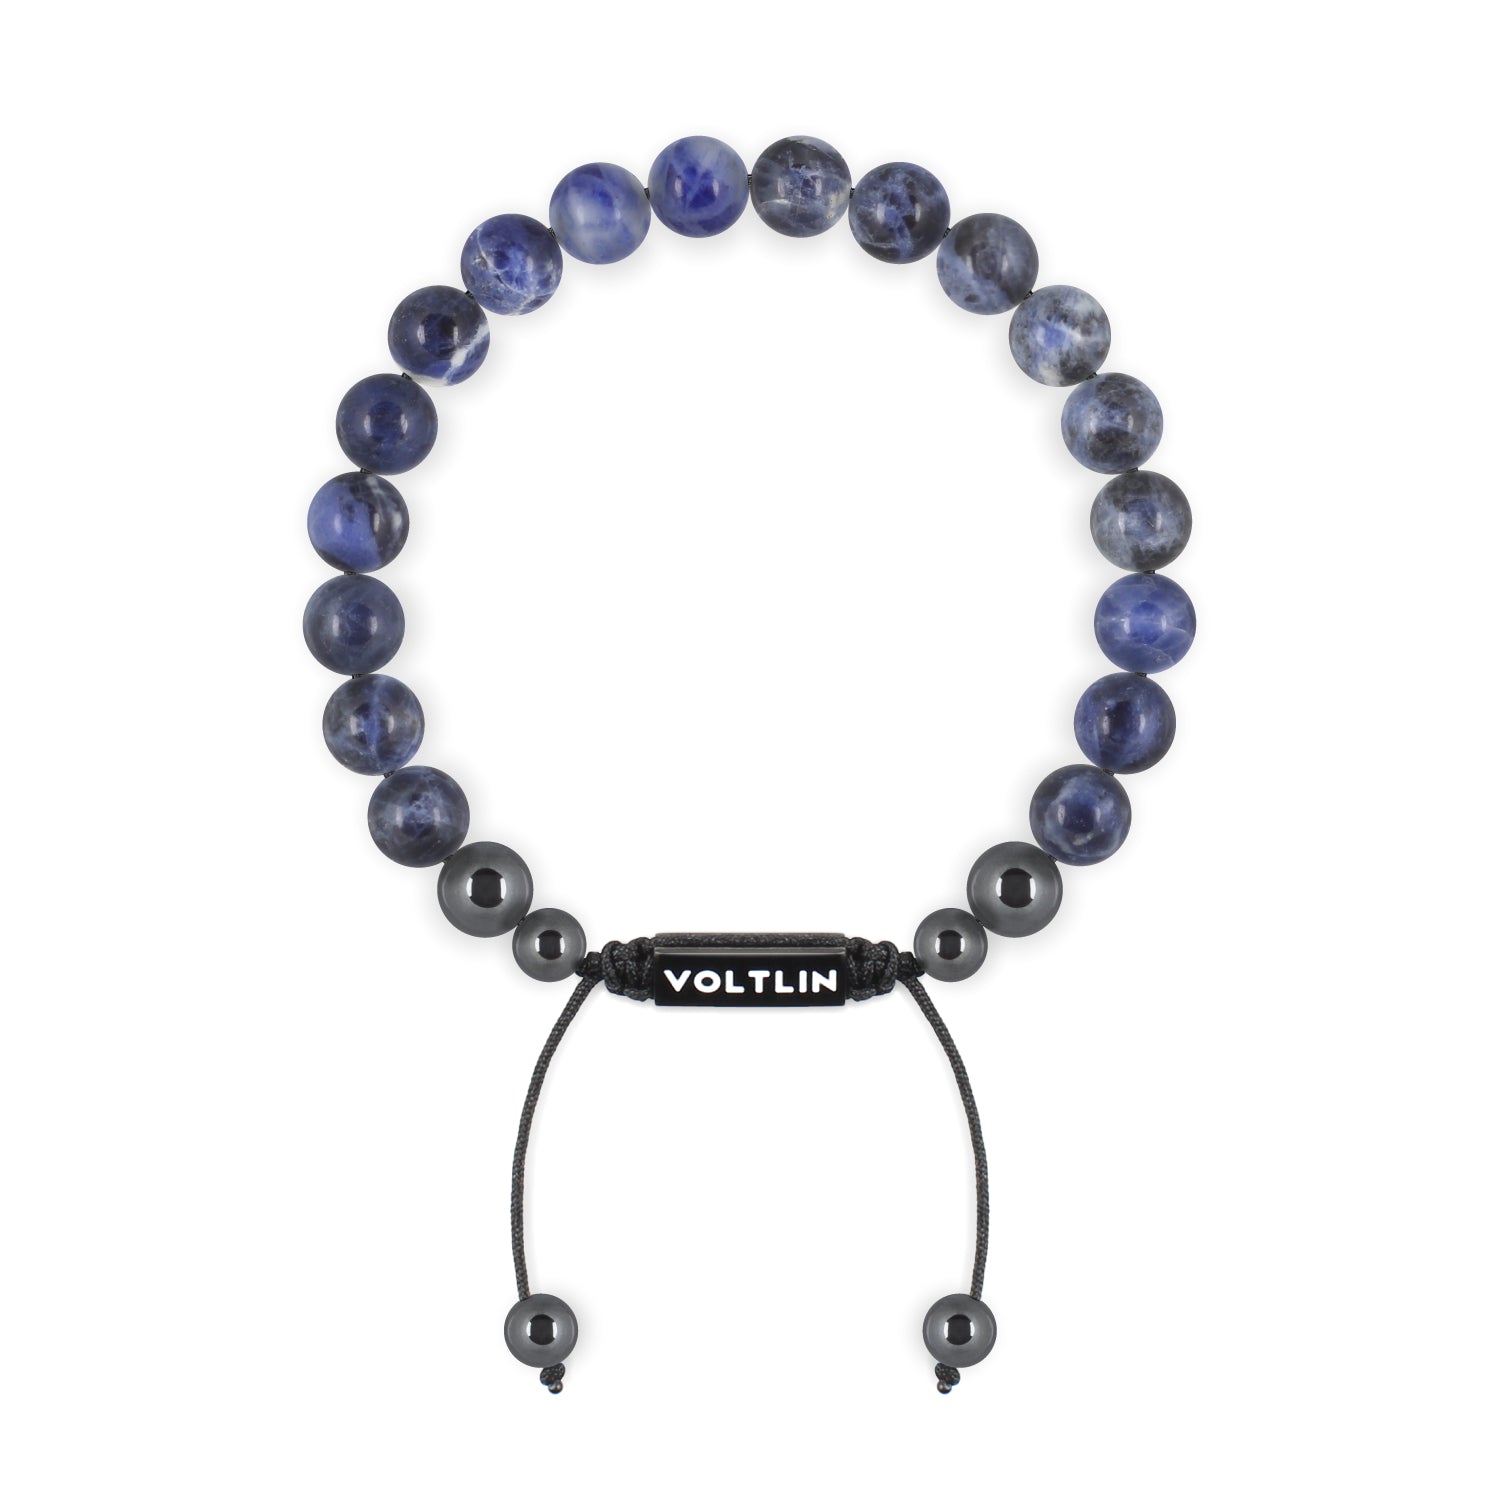 Front view of an 8mm Sodalite crystal beaded shamballa bracelet with black stainless steel logo bead made by Voltlin